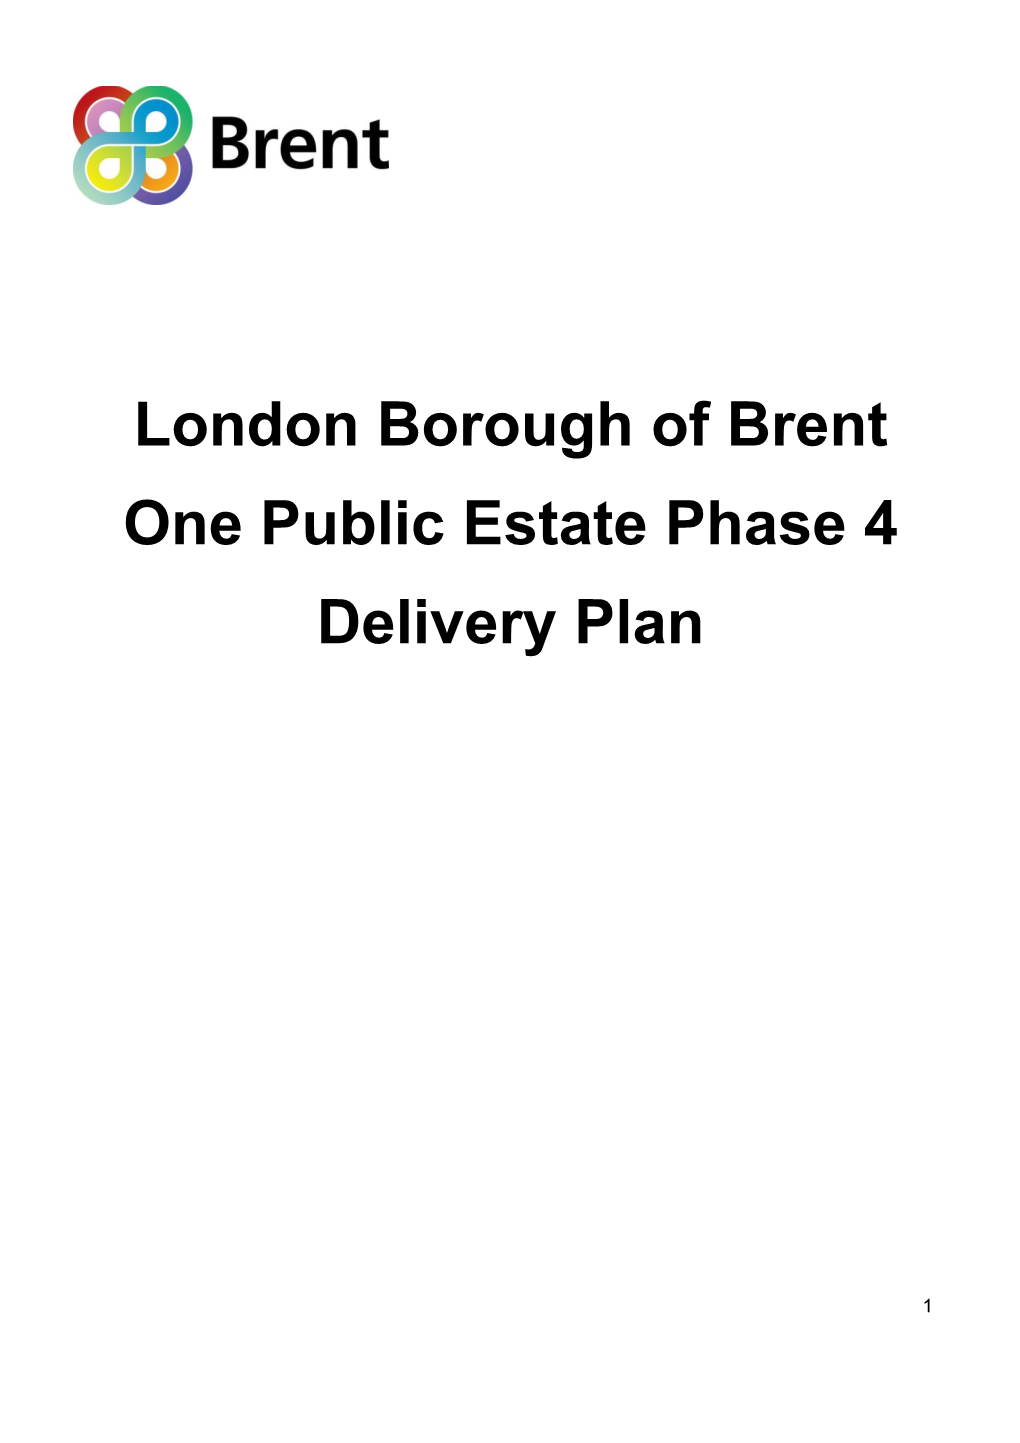 London Borough of Brent One Public Estate Phase 4 Delivery Plan